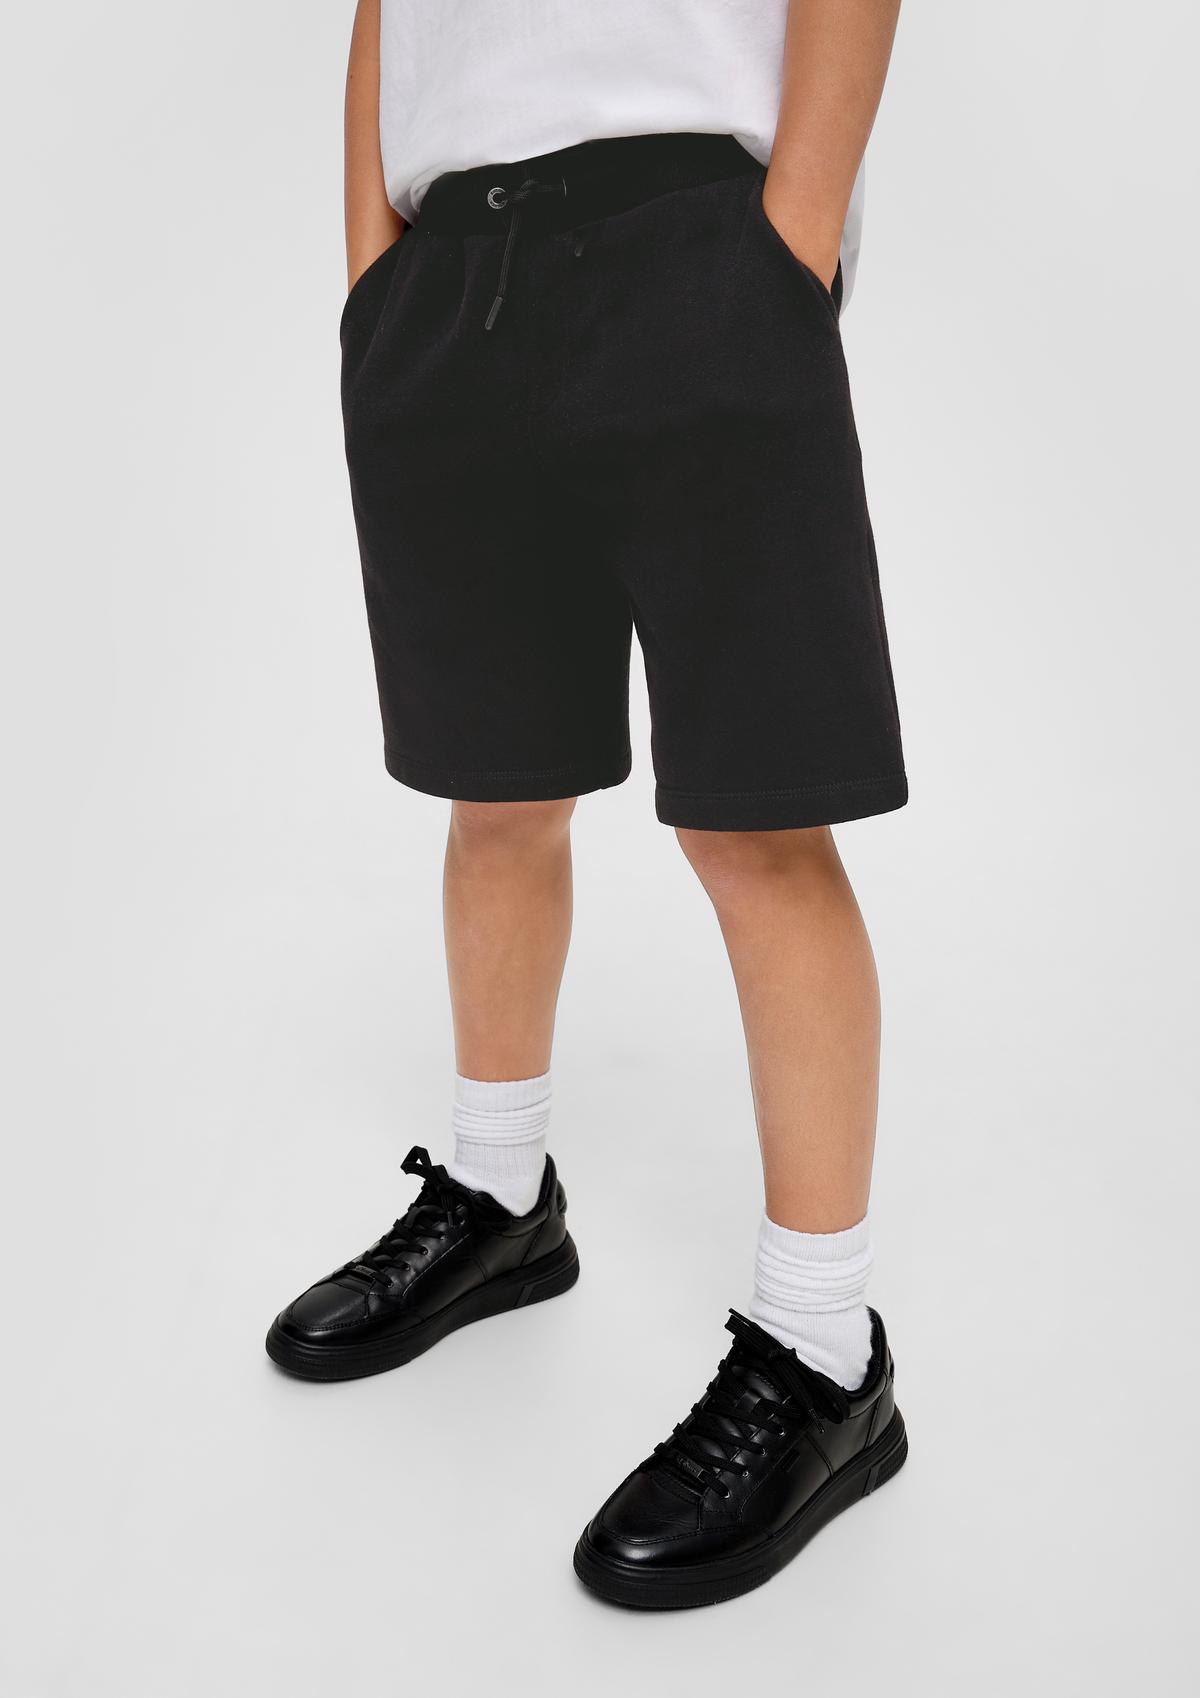 Find Bermuda for and online shorts teens boys